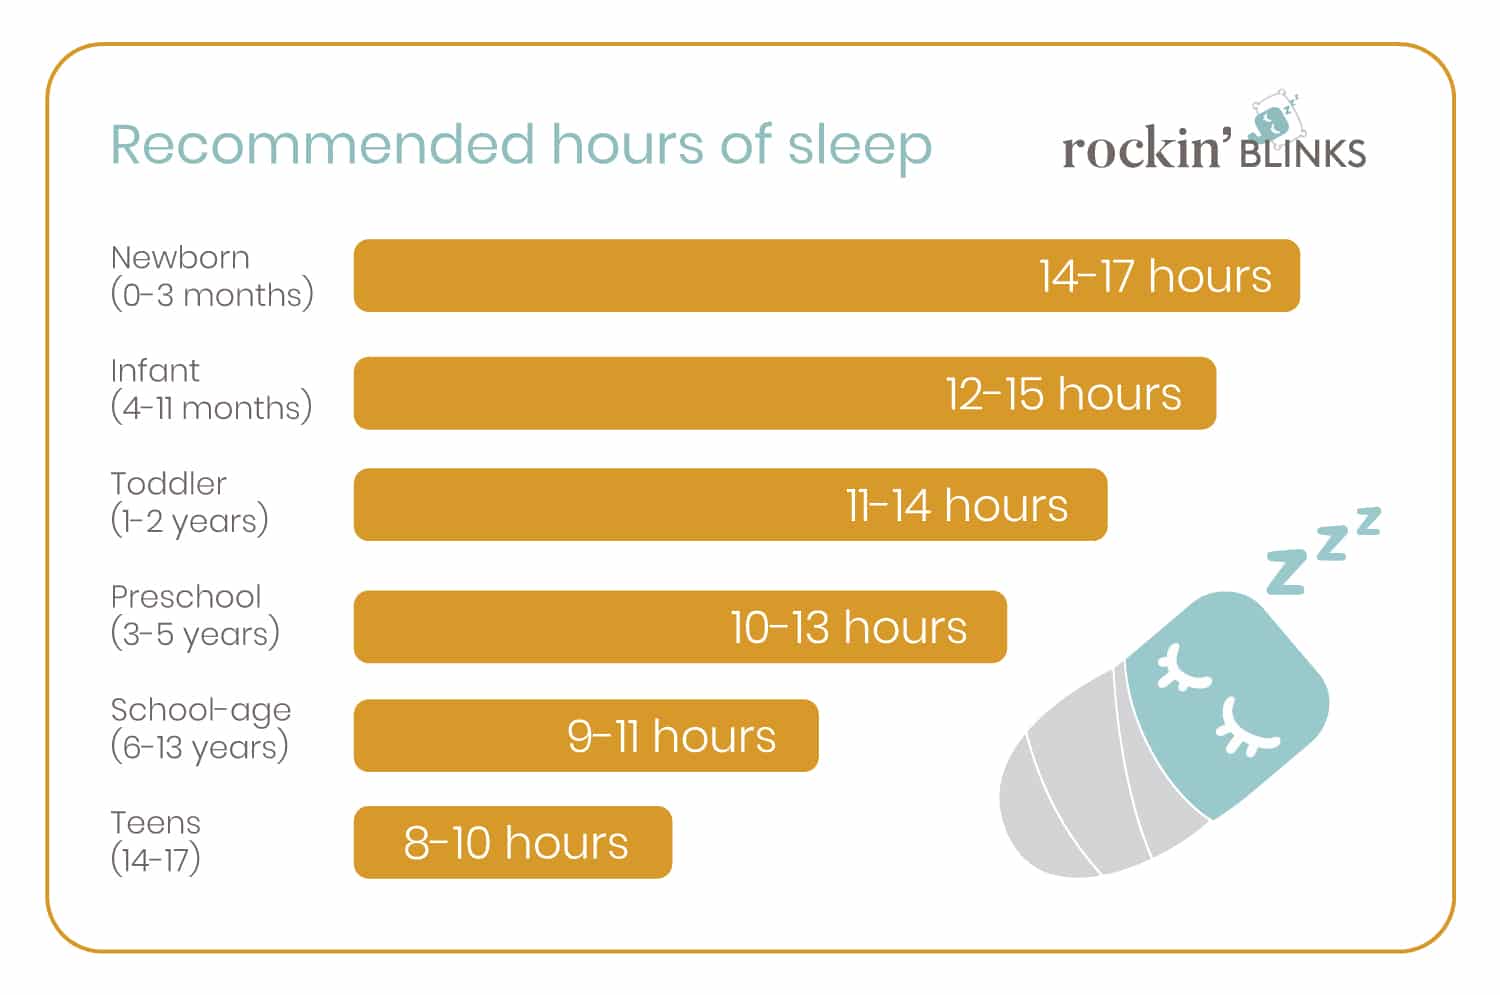 Recommended hours of sleep by age